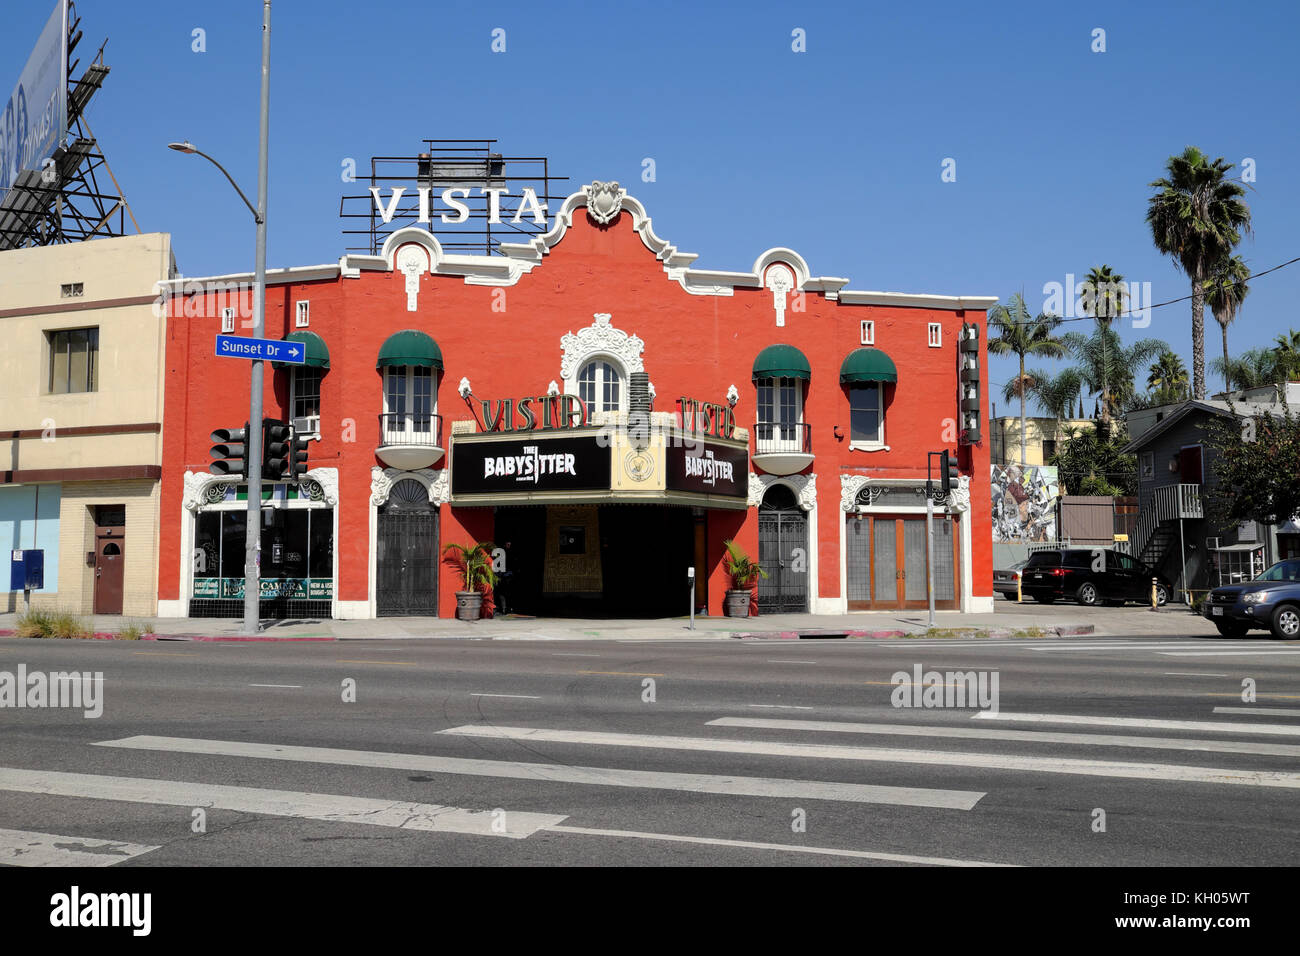 Babysitter movie sign outside the historic Vista Theatre Cinema building on Hollywood and Sunset Boulevard, California, USA  KATHY DEWITT Stock Photo